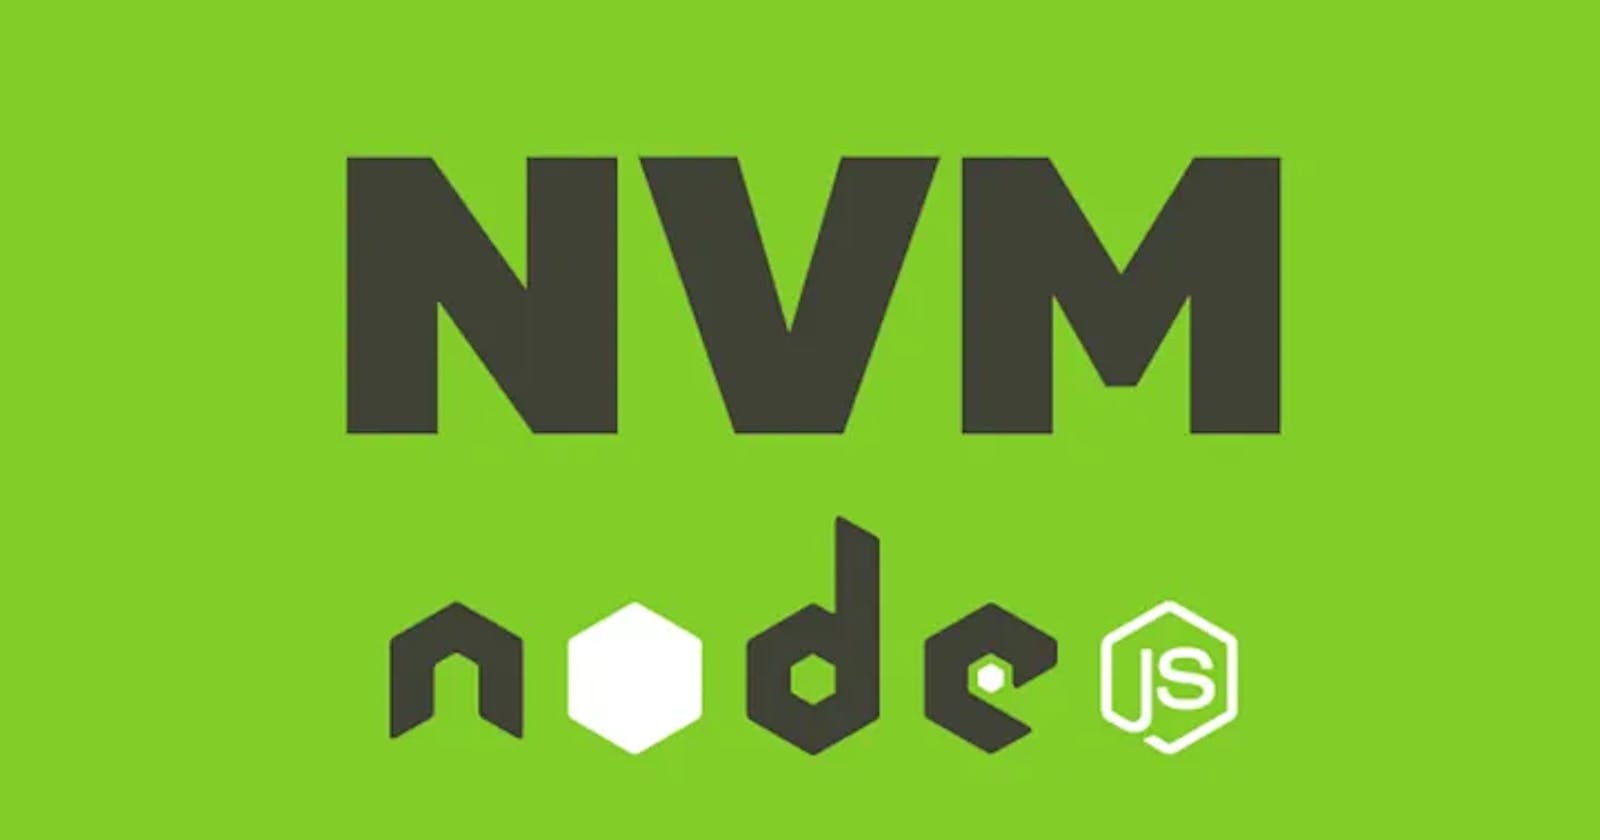 How to install NVM (Node Version Manager) in Garuda linux or Arch Linux based